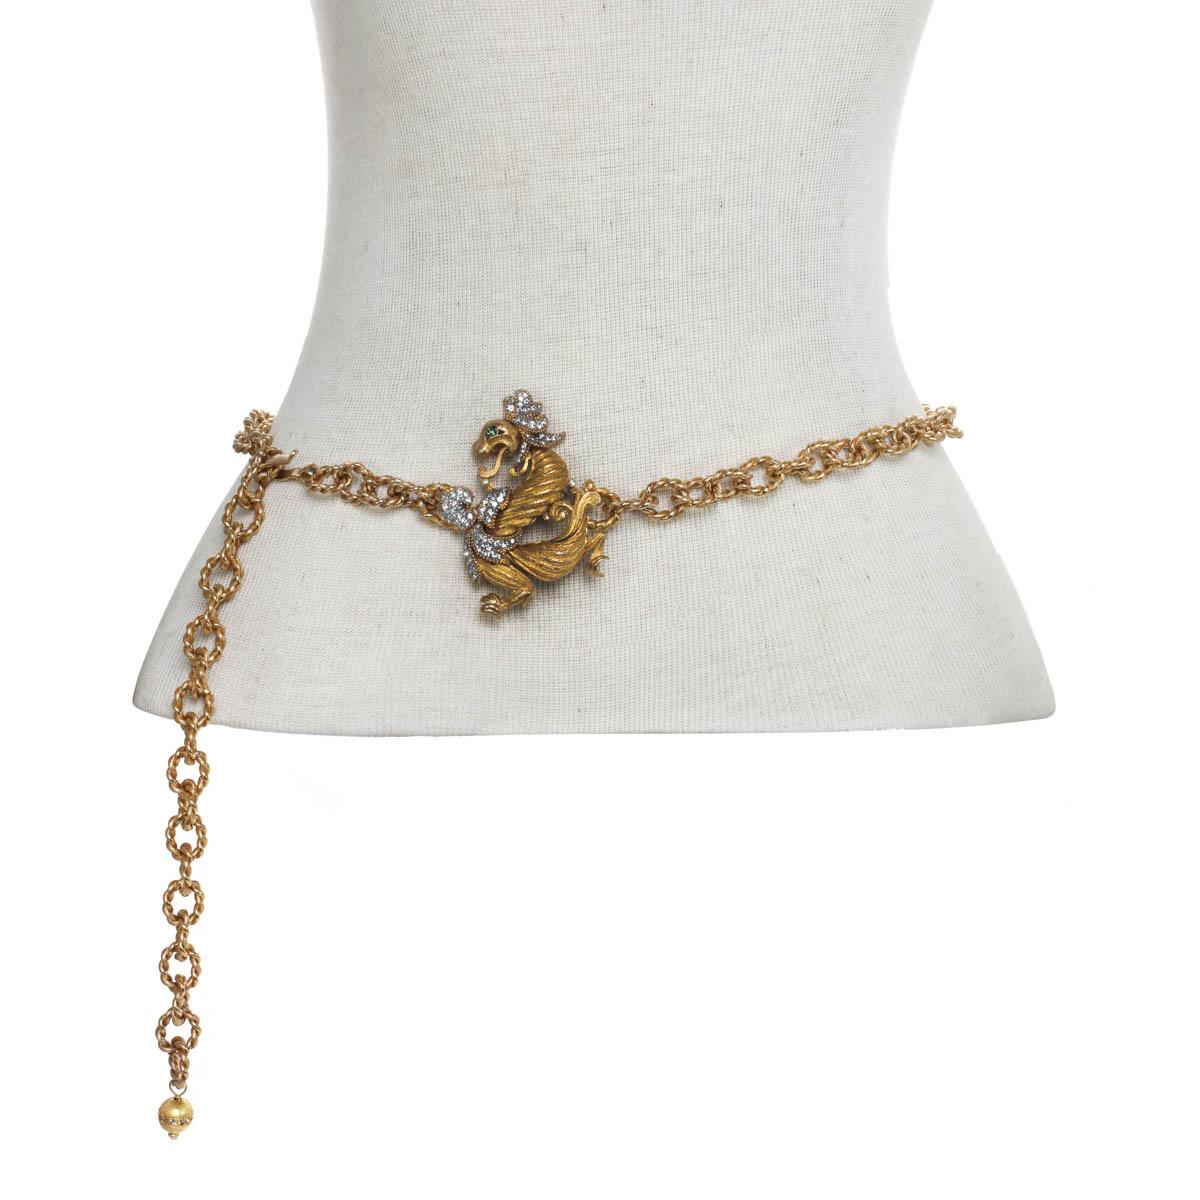 Carolyne Roehm x CINER Gold Mix Textured Dragon Chain Belt S/M In New Condition For Sale In New York, NY